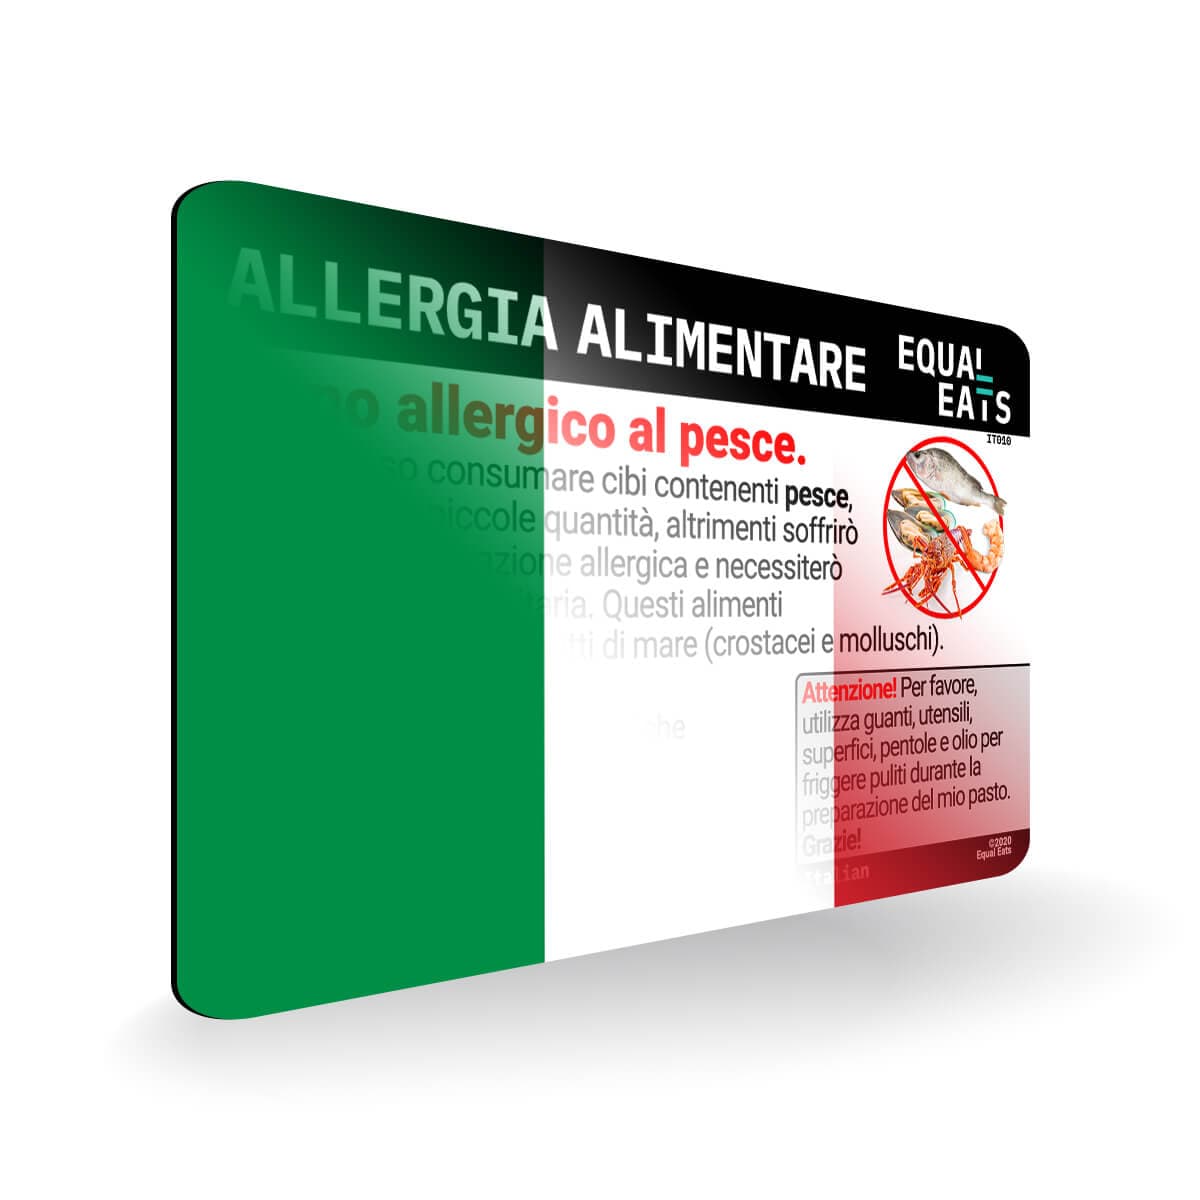 Seafood Allergy in Italian. Seafood Allergy Card for Italy